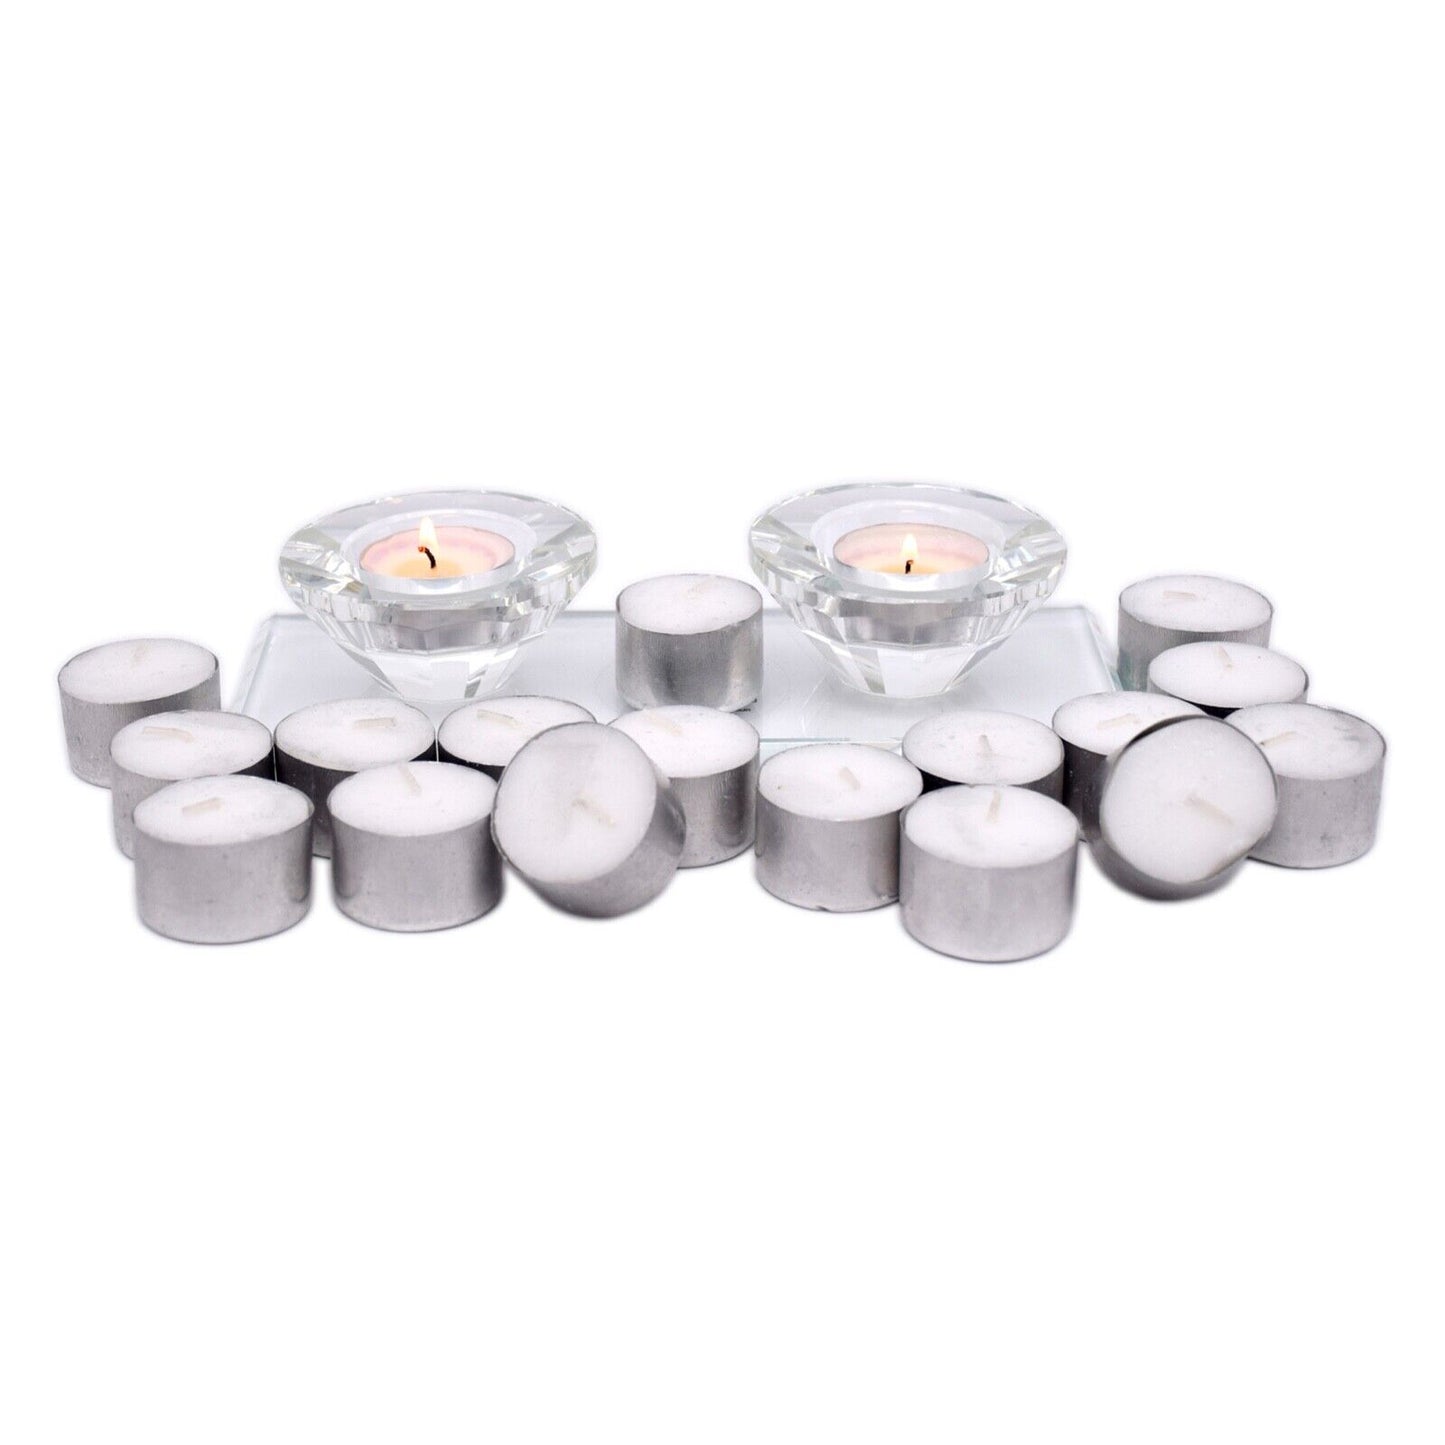 Decorative Mirrored Glass Crystal Effect Tealight Candle Holder, 100 Tealights